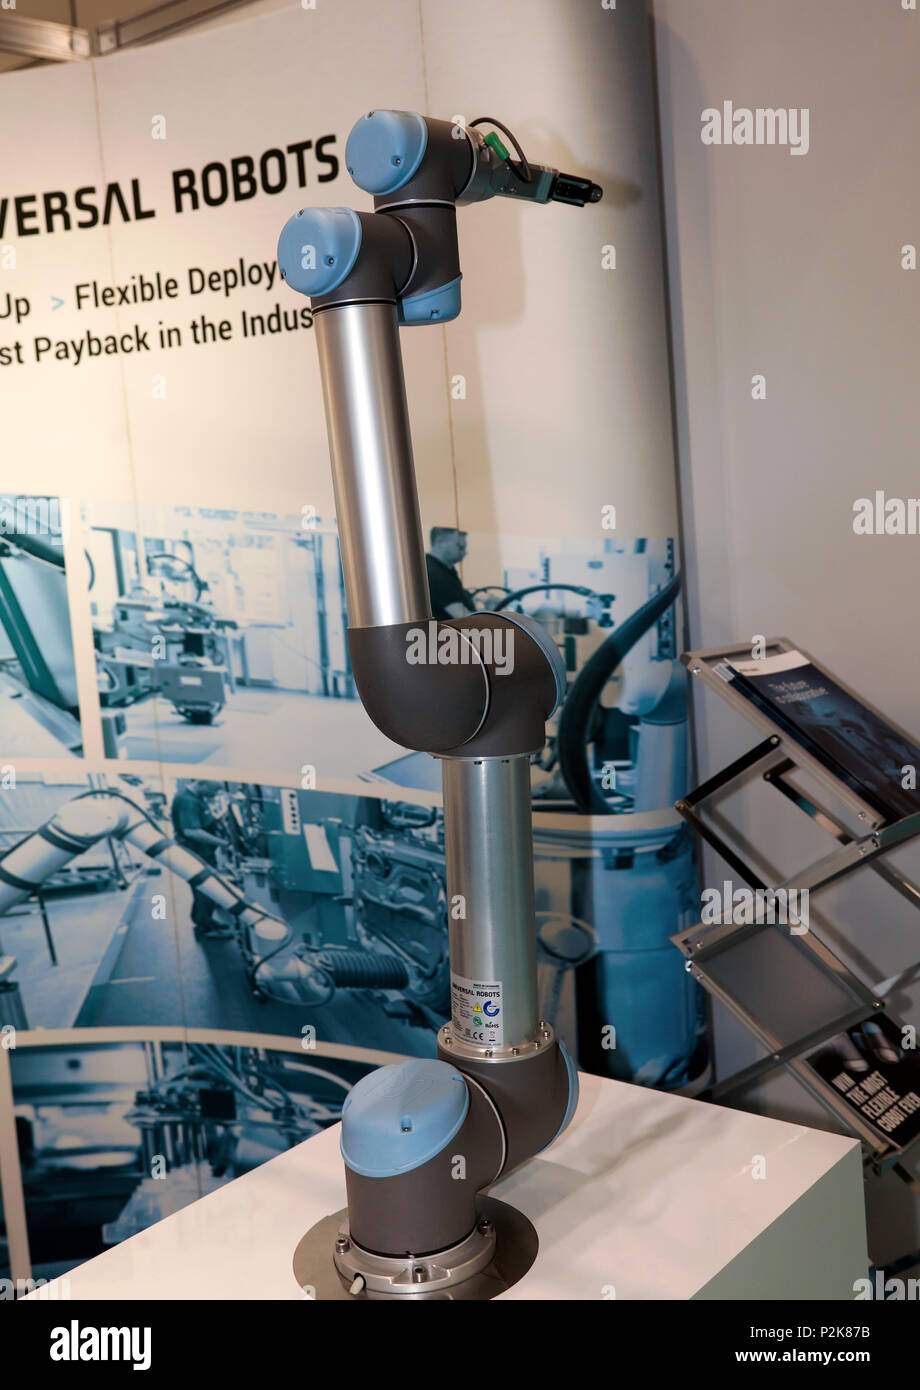 Universal Robots, cobot UR5, a flexible industrial collaborative robot arm,  being demonstrated at the AI Summit, ExCel London Stock Photo - Alamy